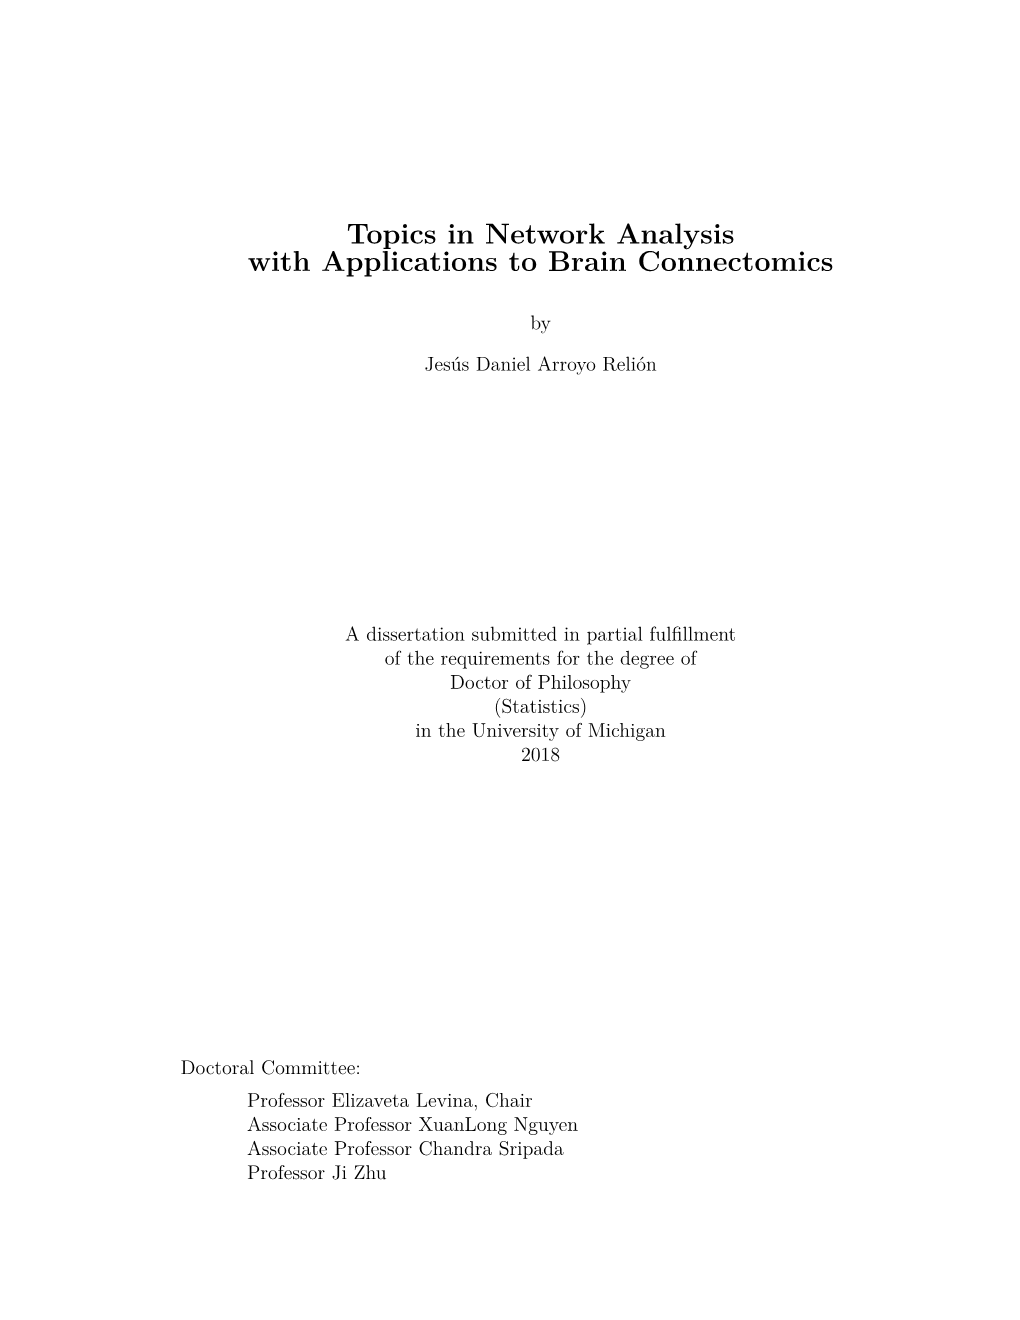 Topics in Network Analysis with Applications to Brain Connectomics